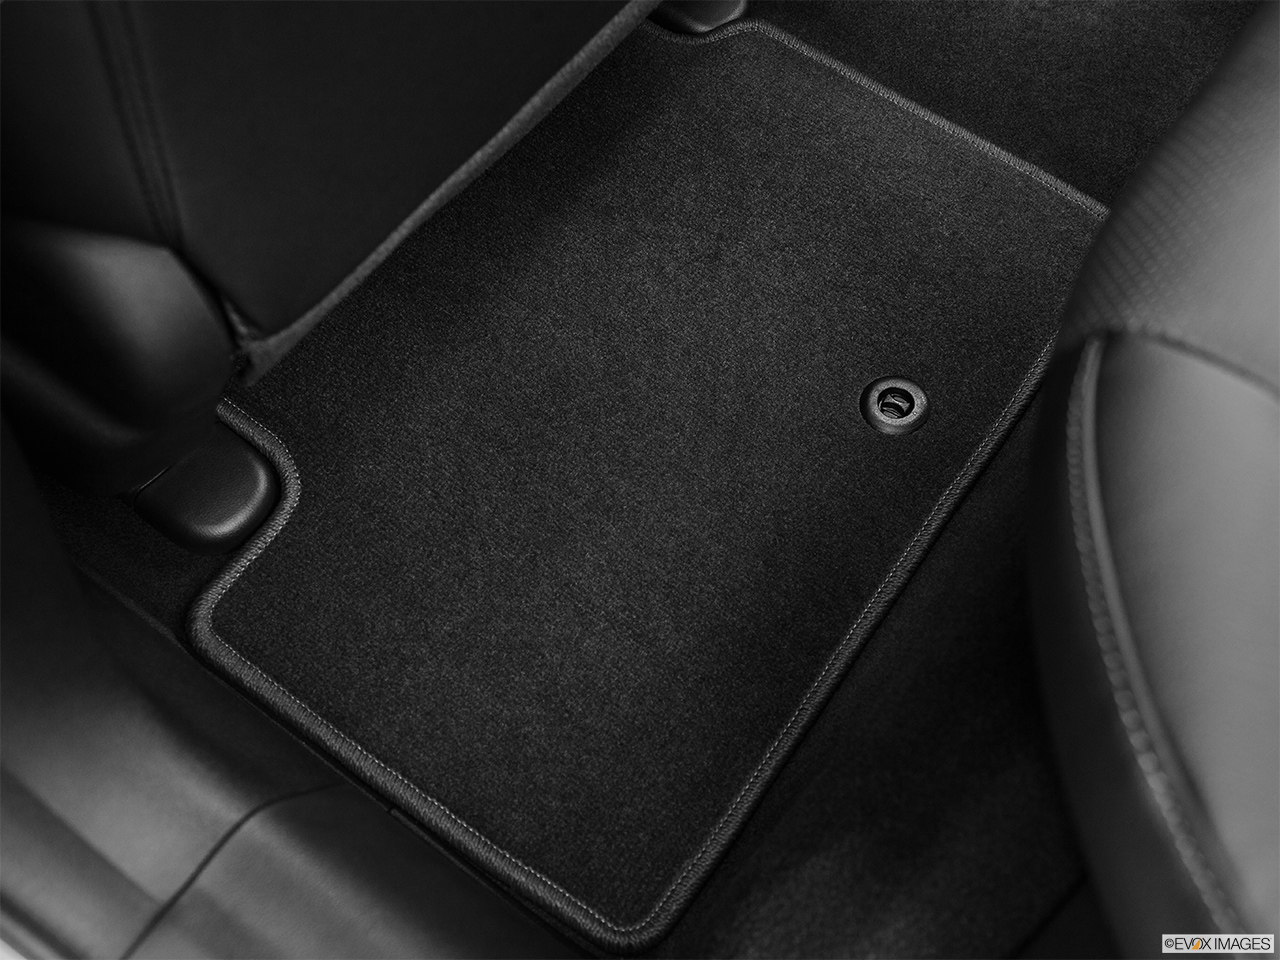 2015 Acura ILX 6-Speed Manual Rear driver's side floor mat. Mid-seat level from outside looking in. 